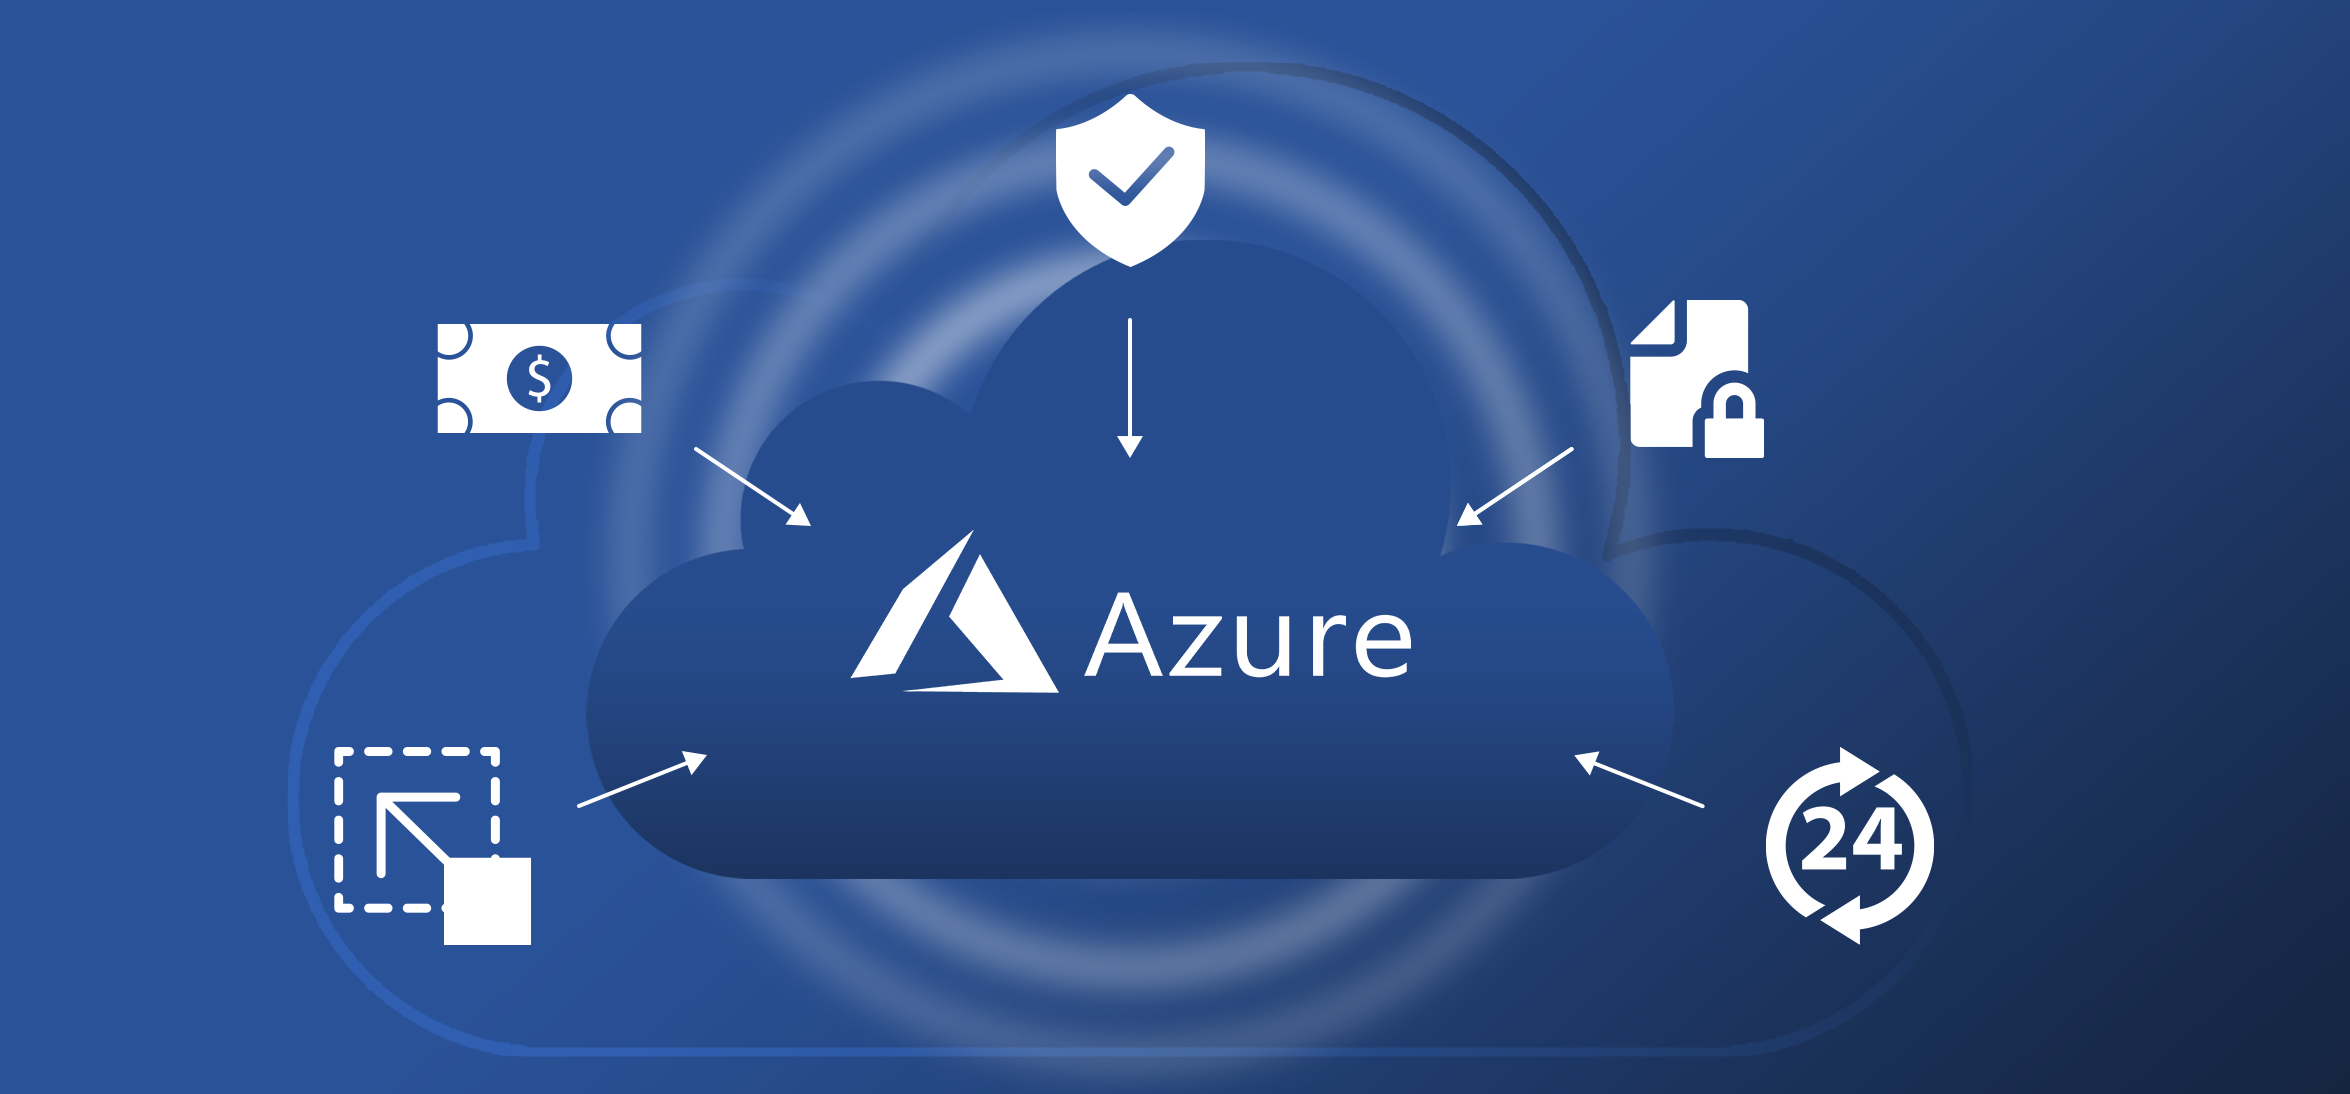 Microsoft Azure Administration and Consulting Services in Franklin Park NJ, 08823